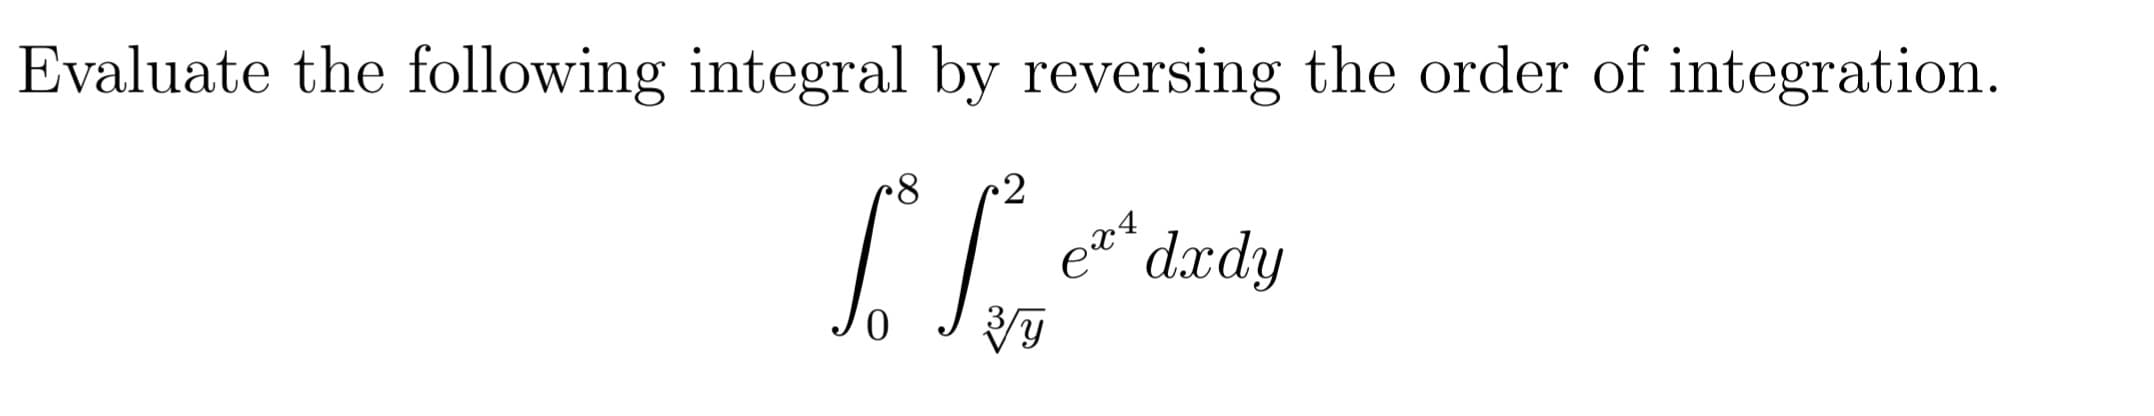 Evaluate the following integral by reversing the order of integration.
2
* dxdy
